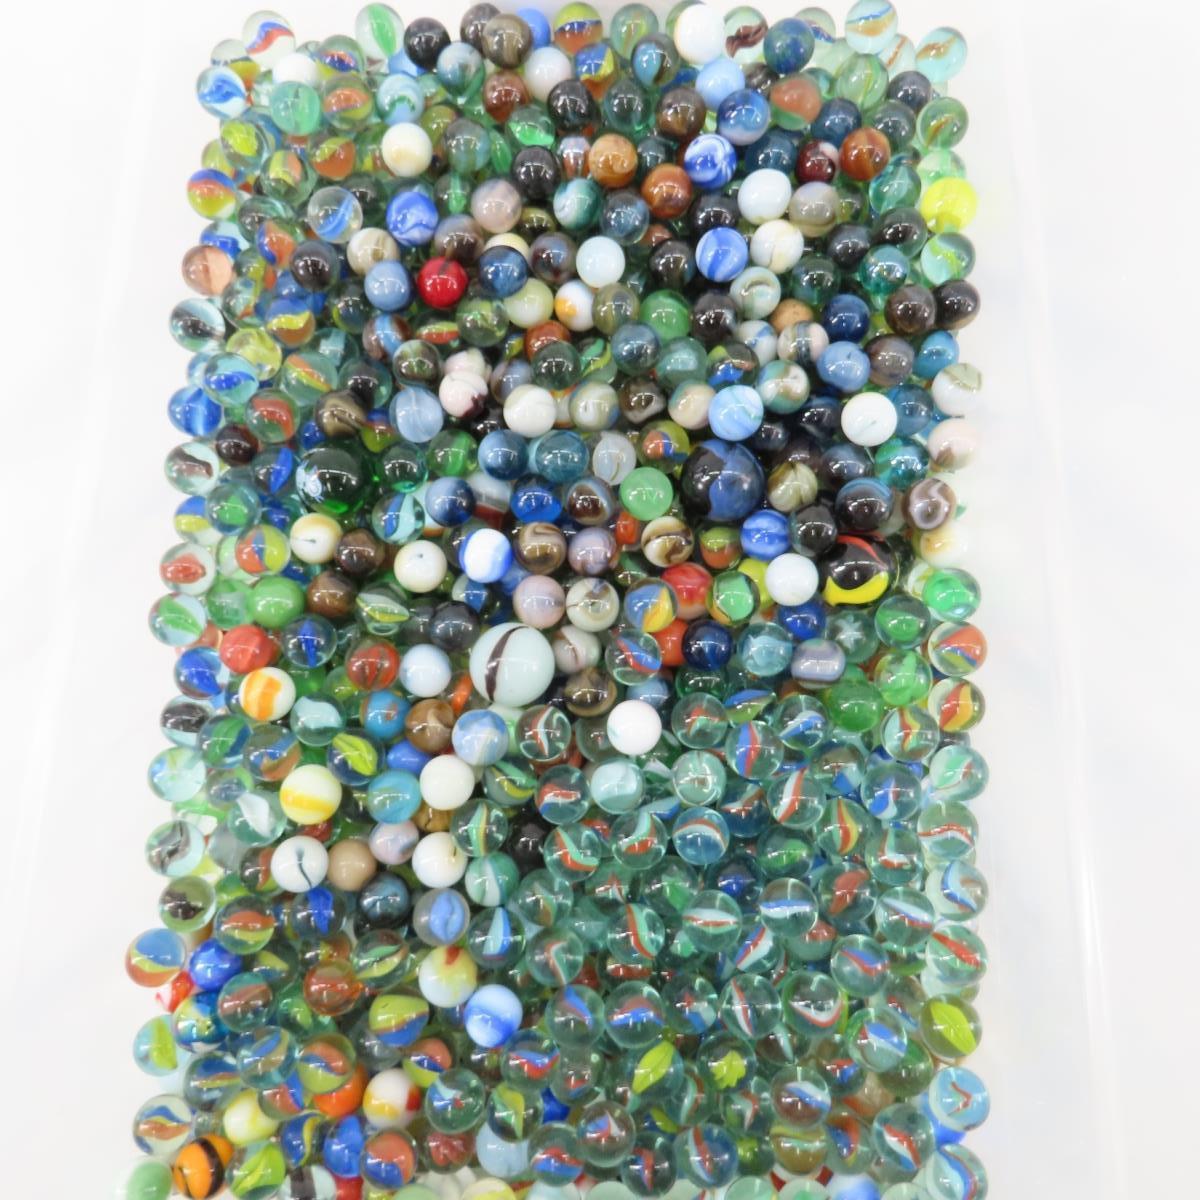 15# of Modern Marbles & Shooters